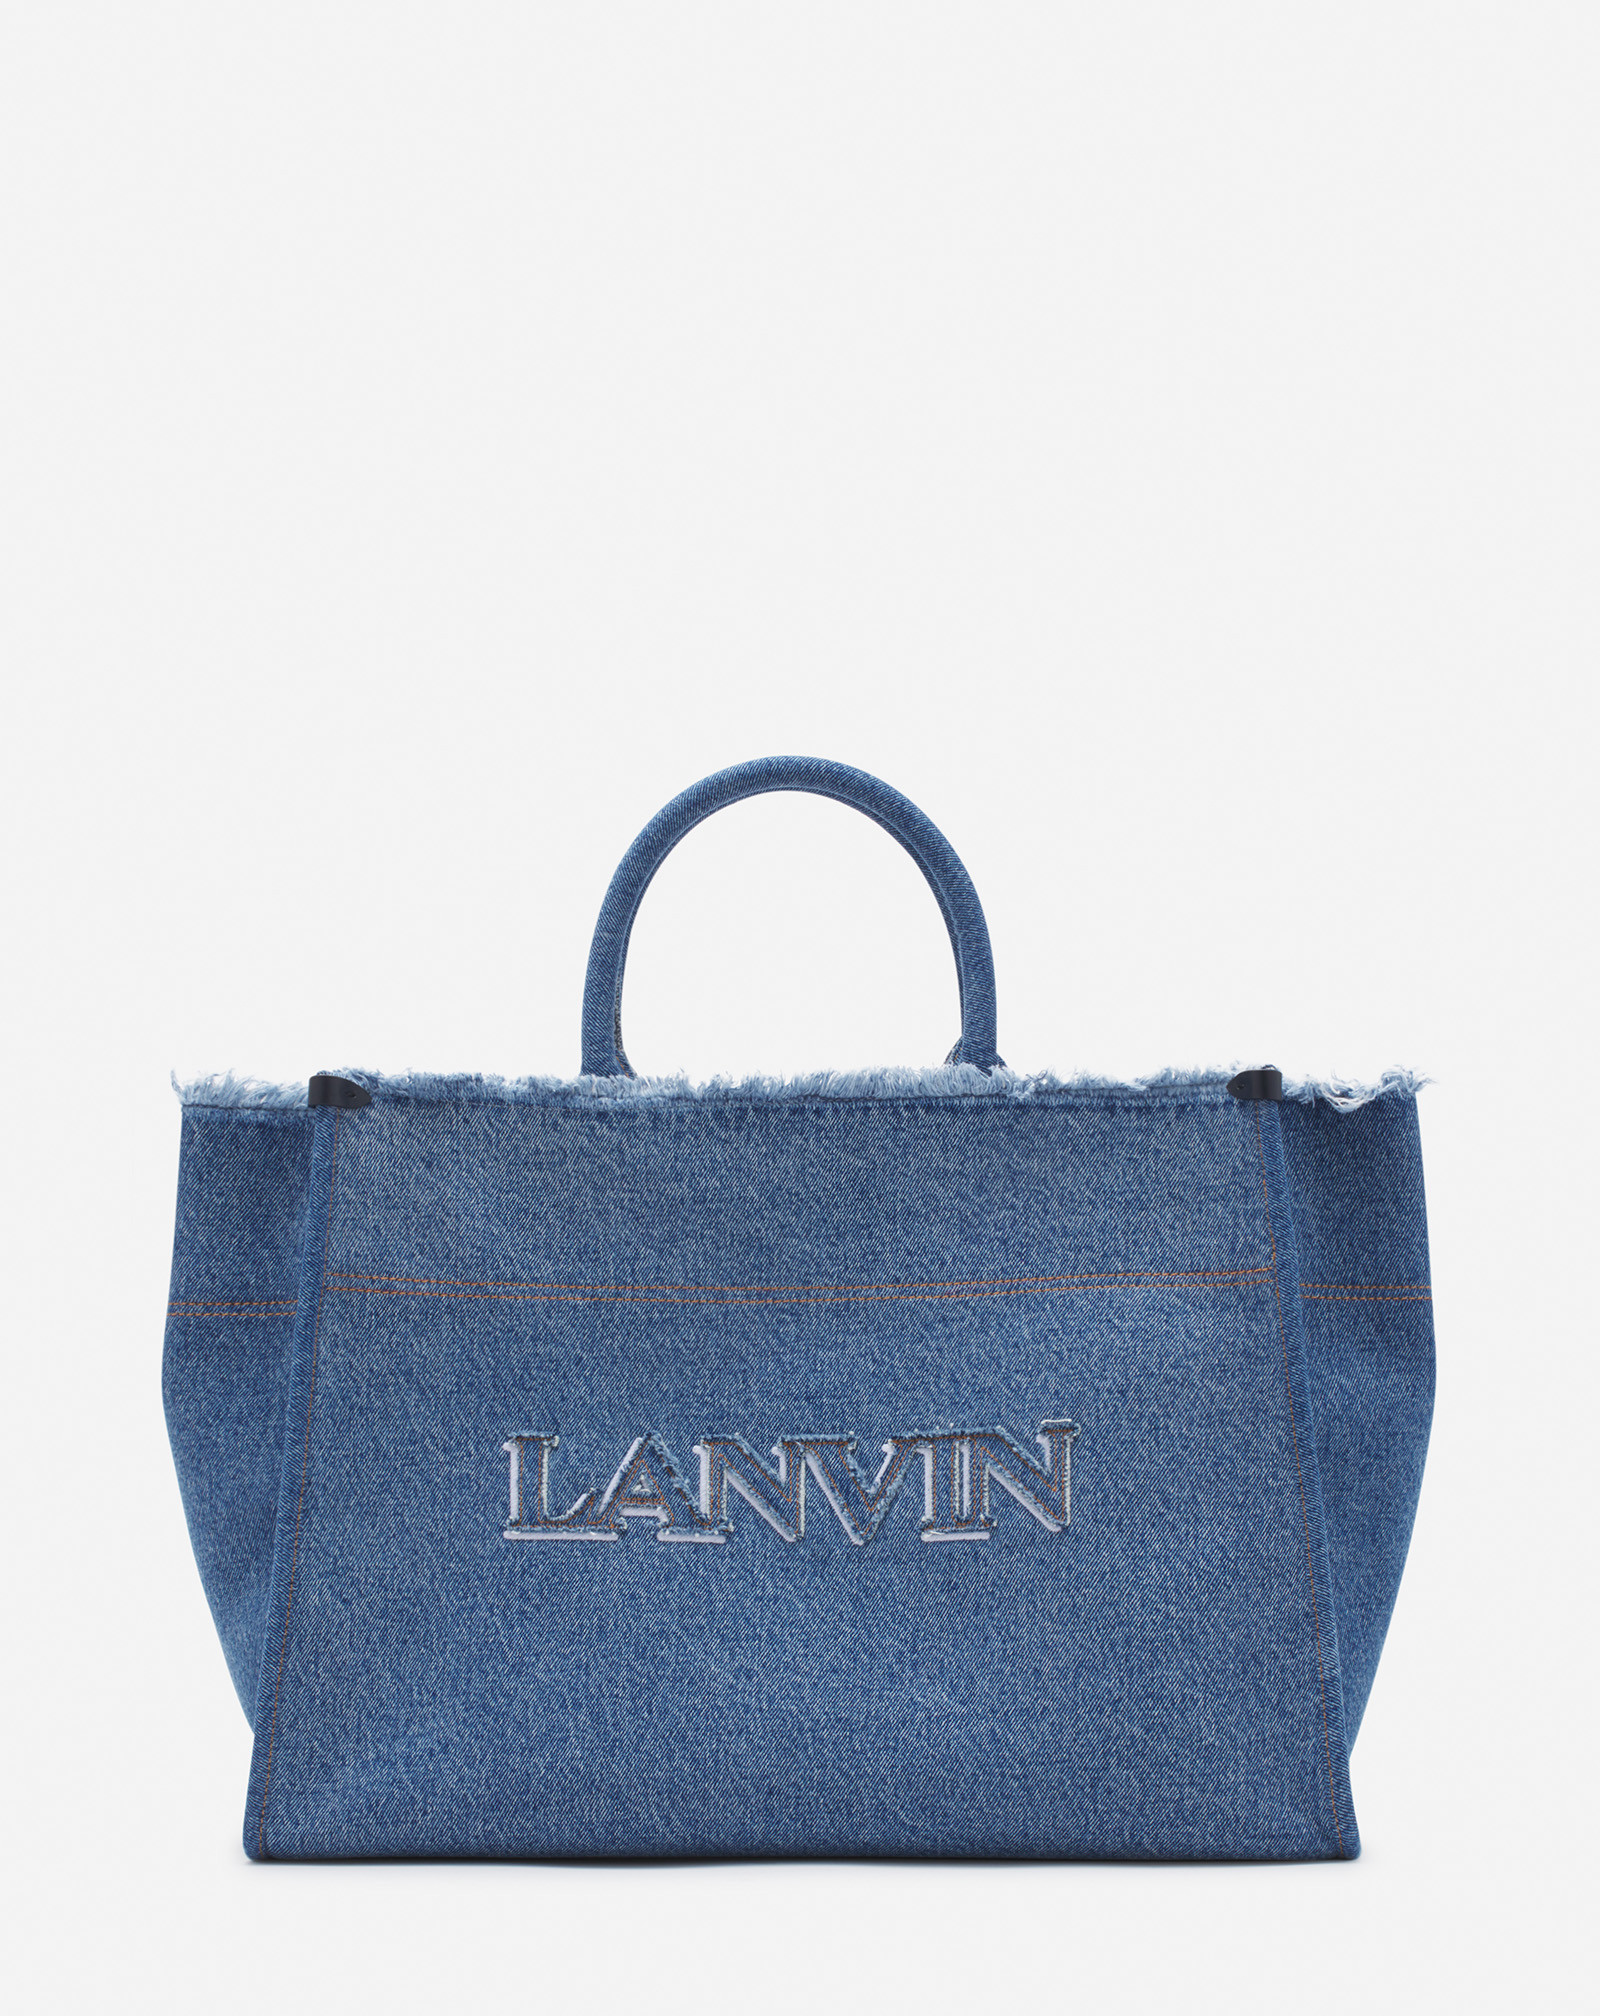 IN&OUT MM TOTE BAG IN DENIM